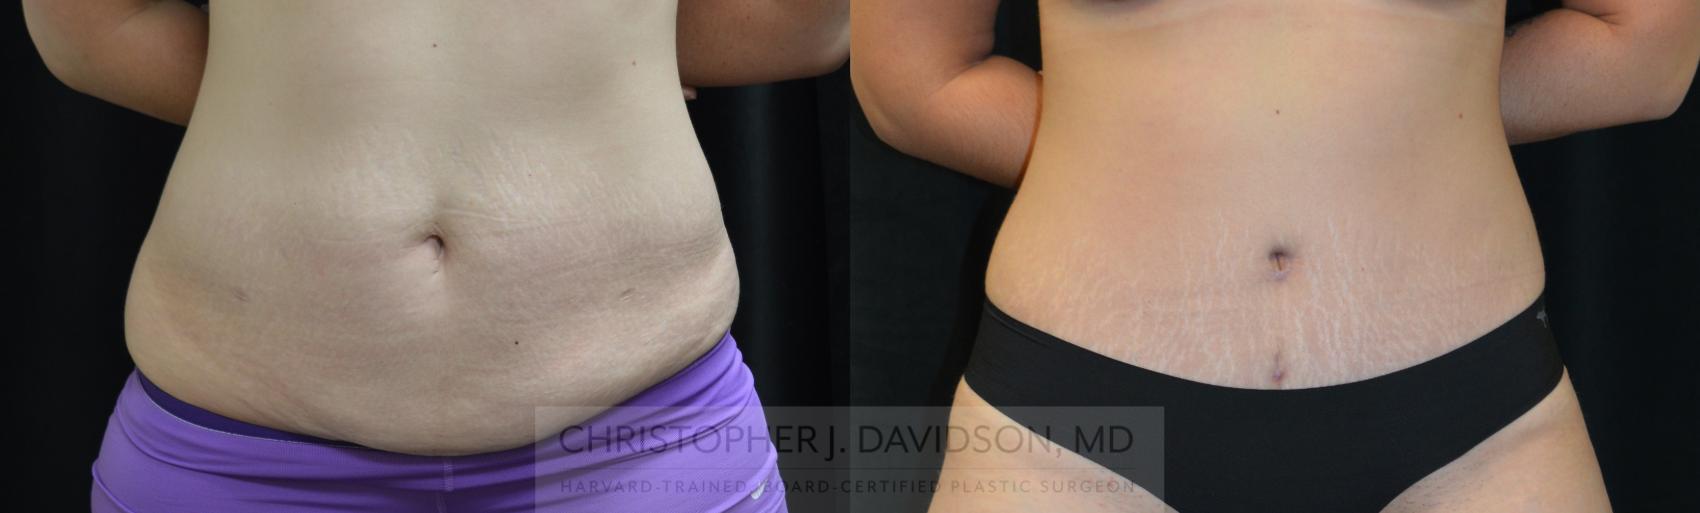 Tummy Tuck (Abdominoplasty) Case 259 Before & After Front | Wellesley, MA | Christopher J. Davidson, MD